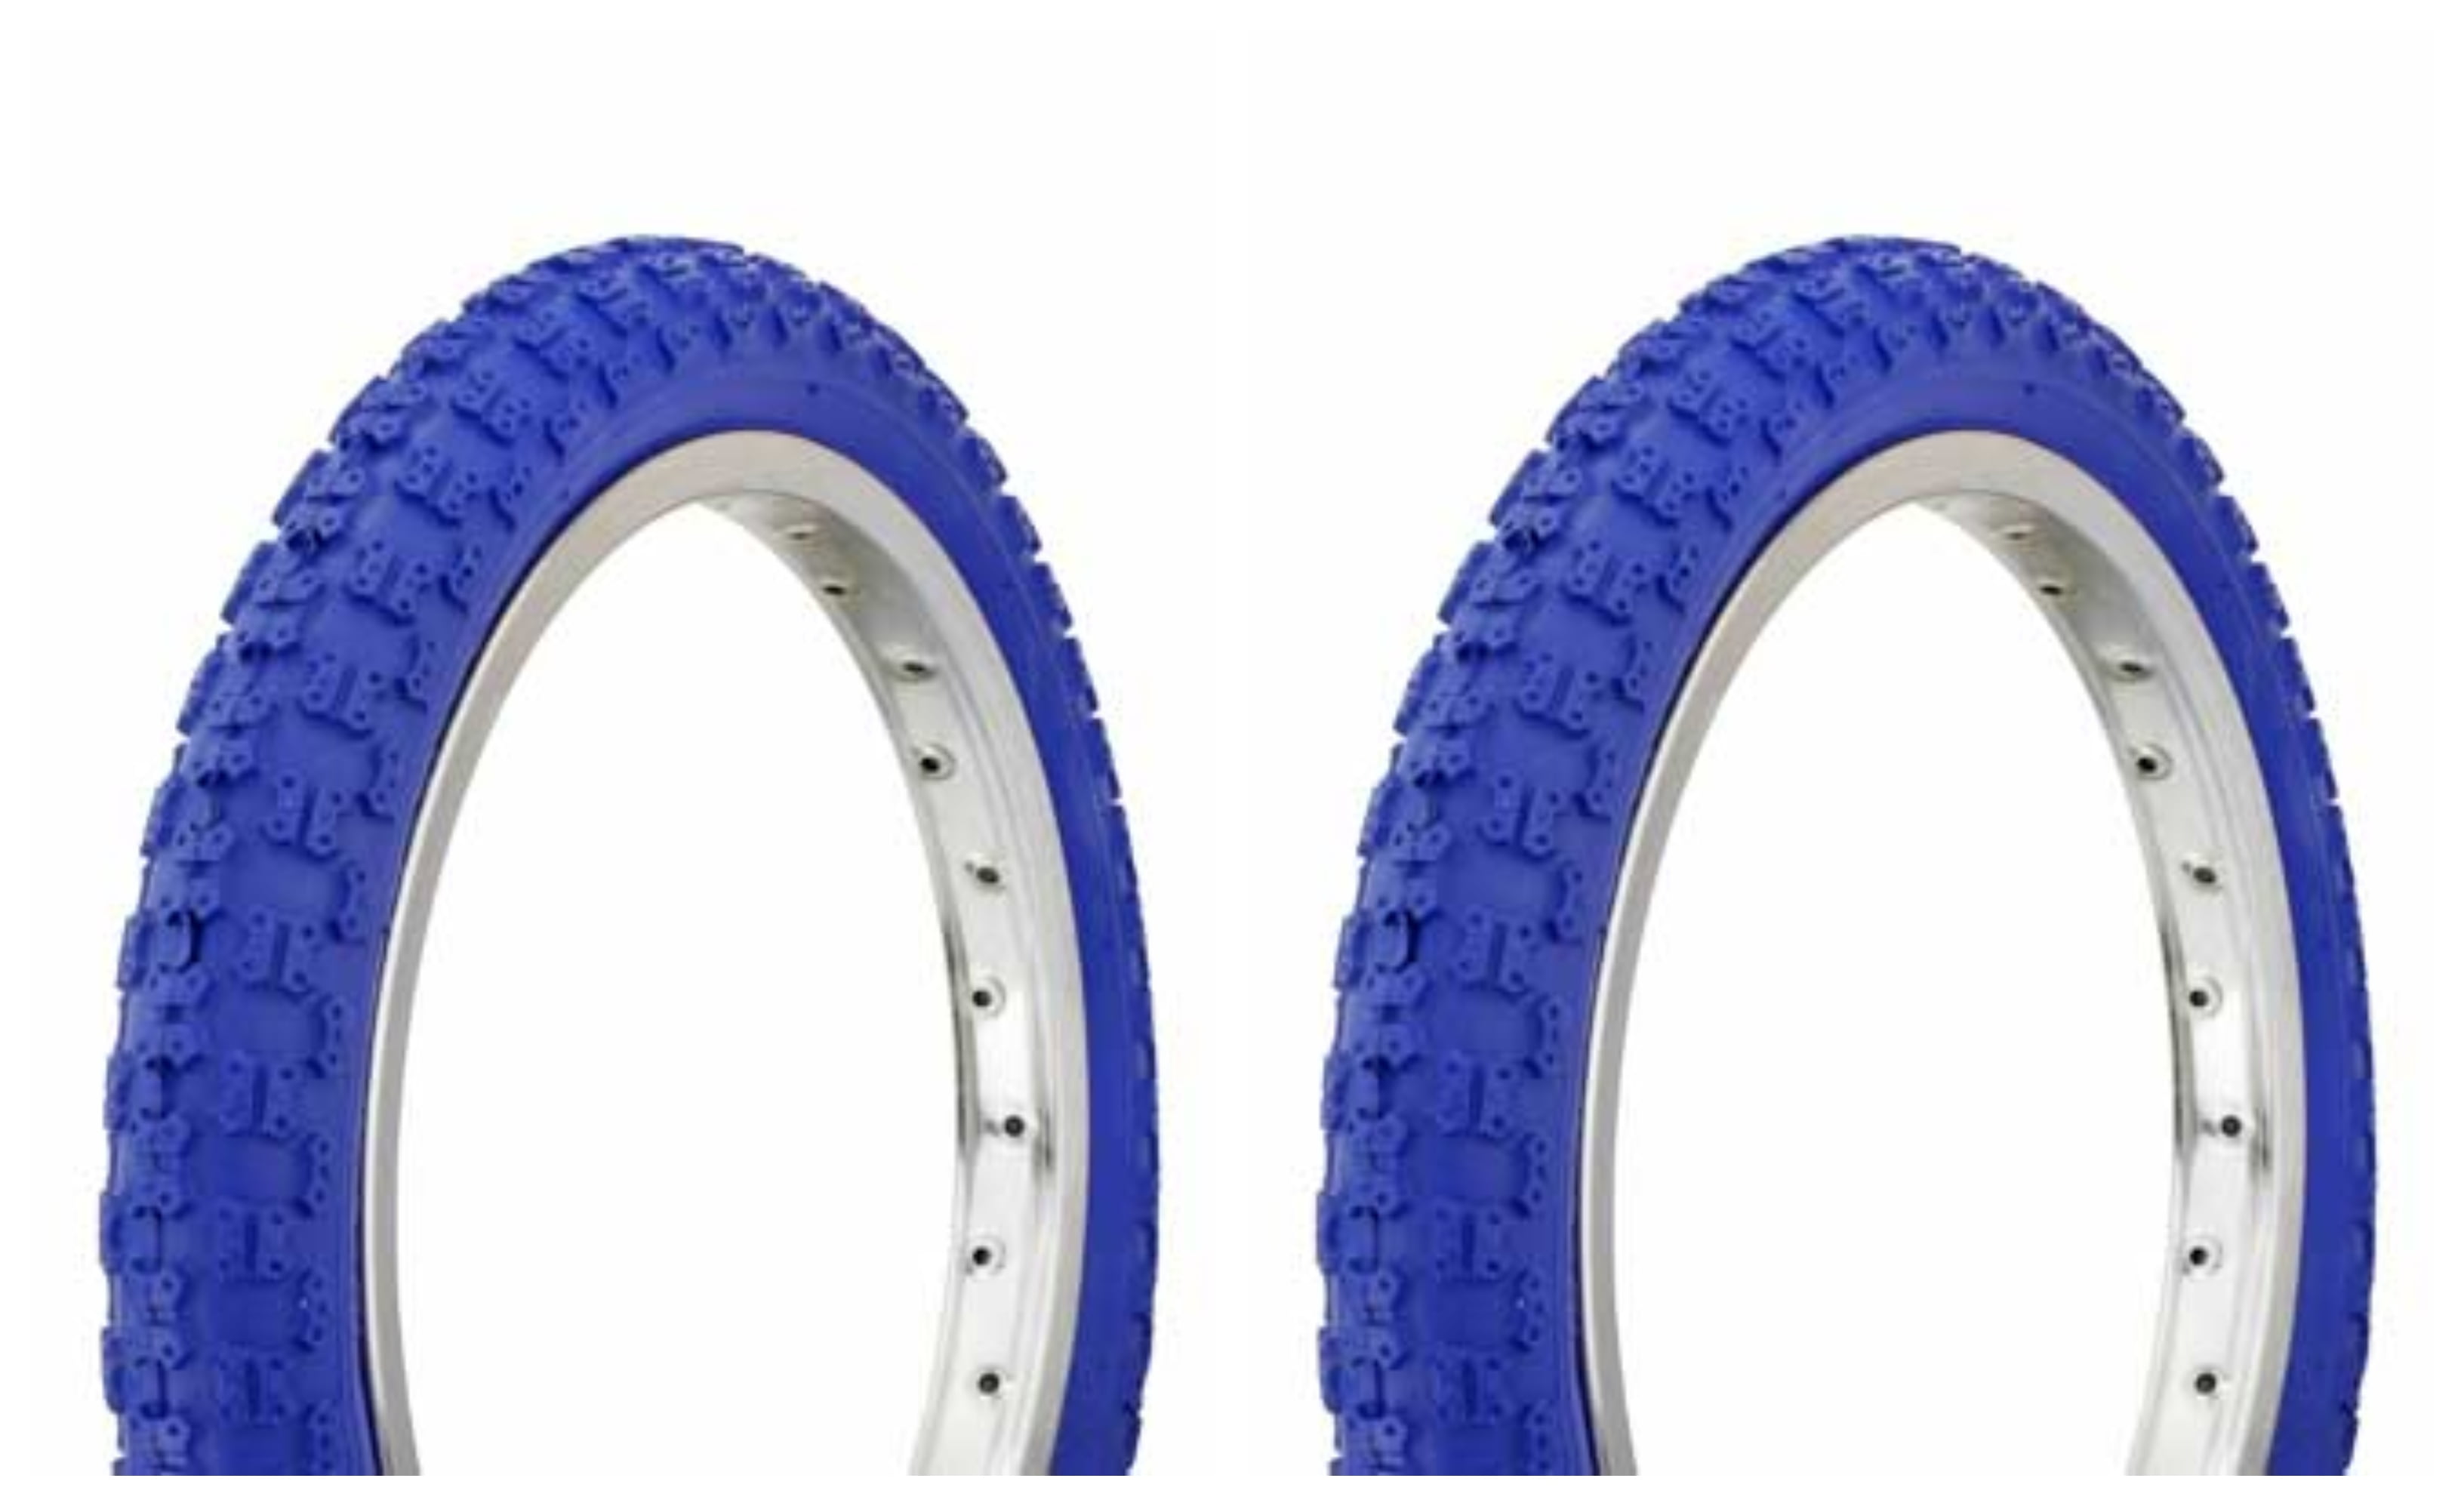 Tire set. 2 Tires. Two Tires Duro 16" x 2.125" Blue/Blue Side Wall HF143G. Bicycle Tires, bike